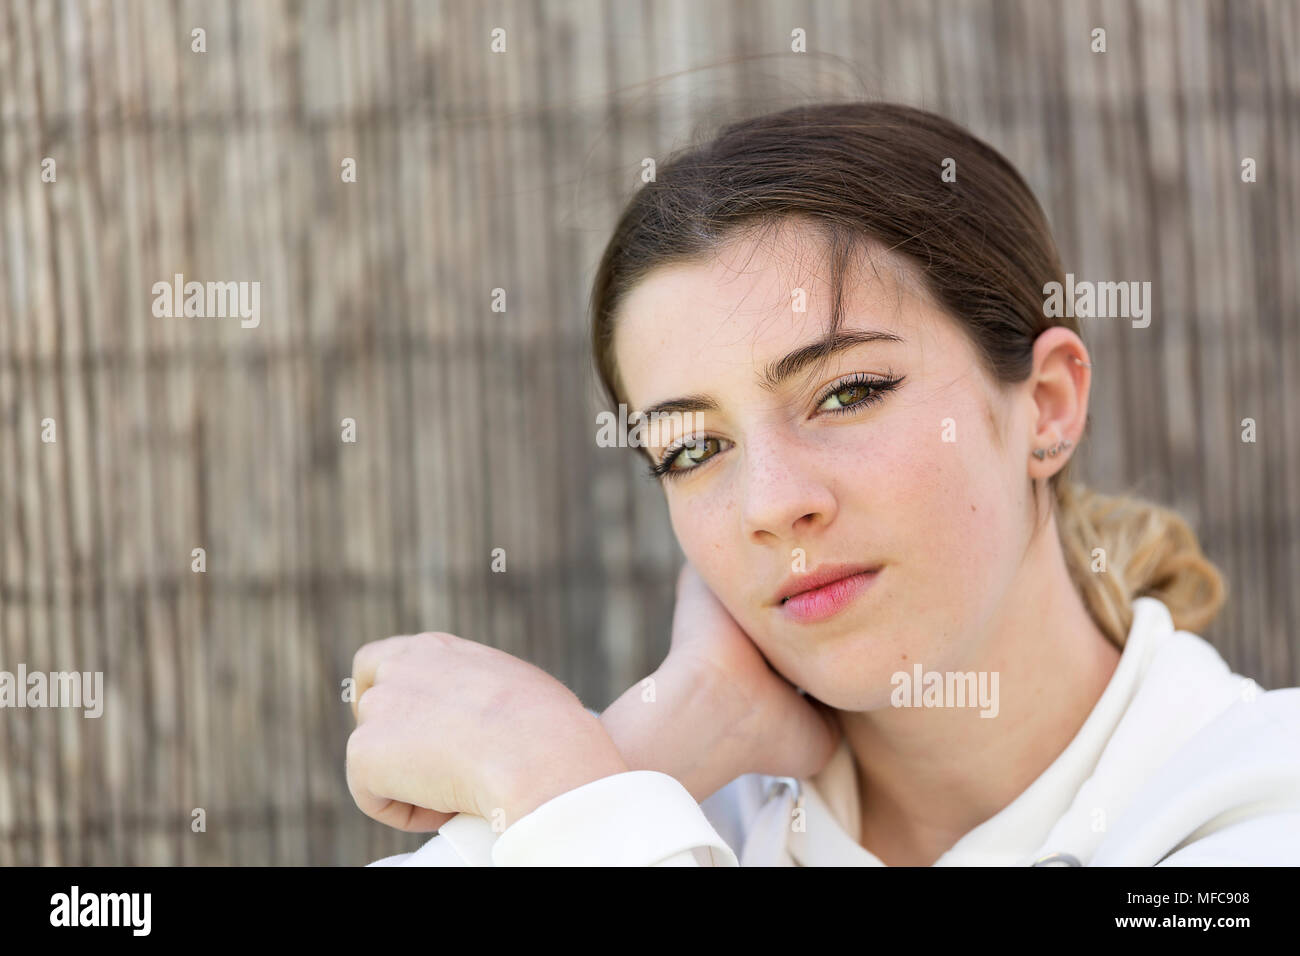 A teenager looking at camera to take some photos. Horizontal shot with natural light. Stock Photo